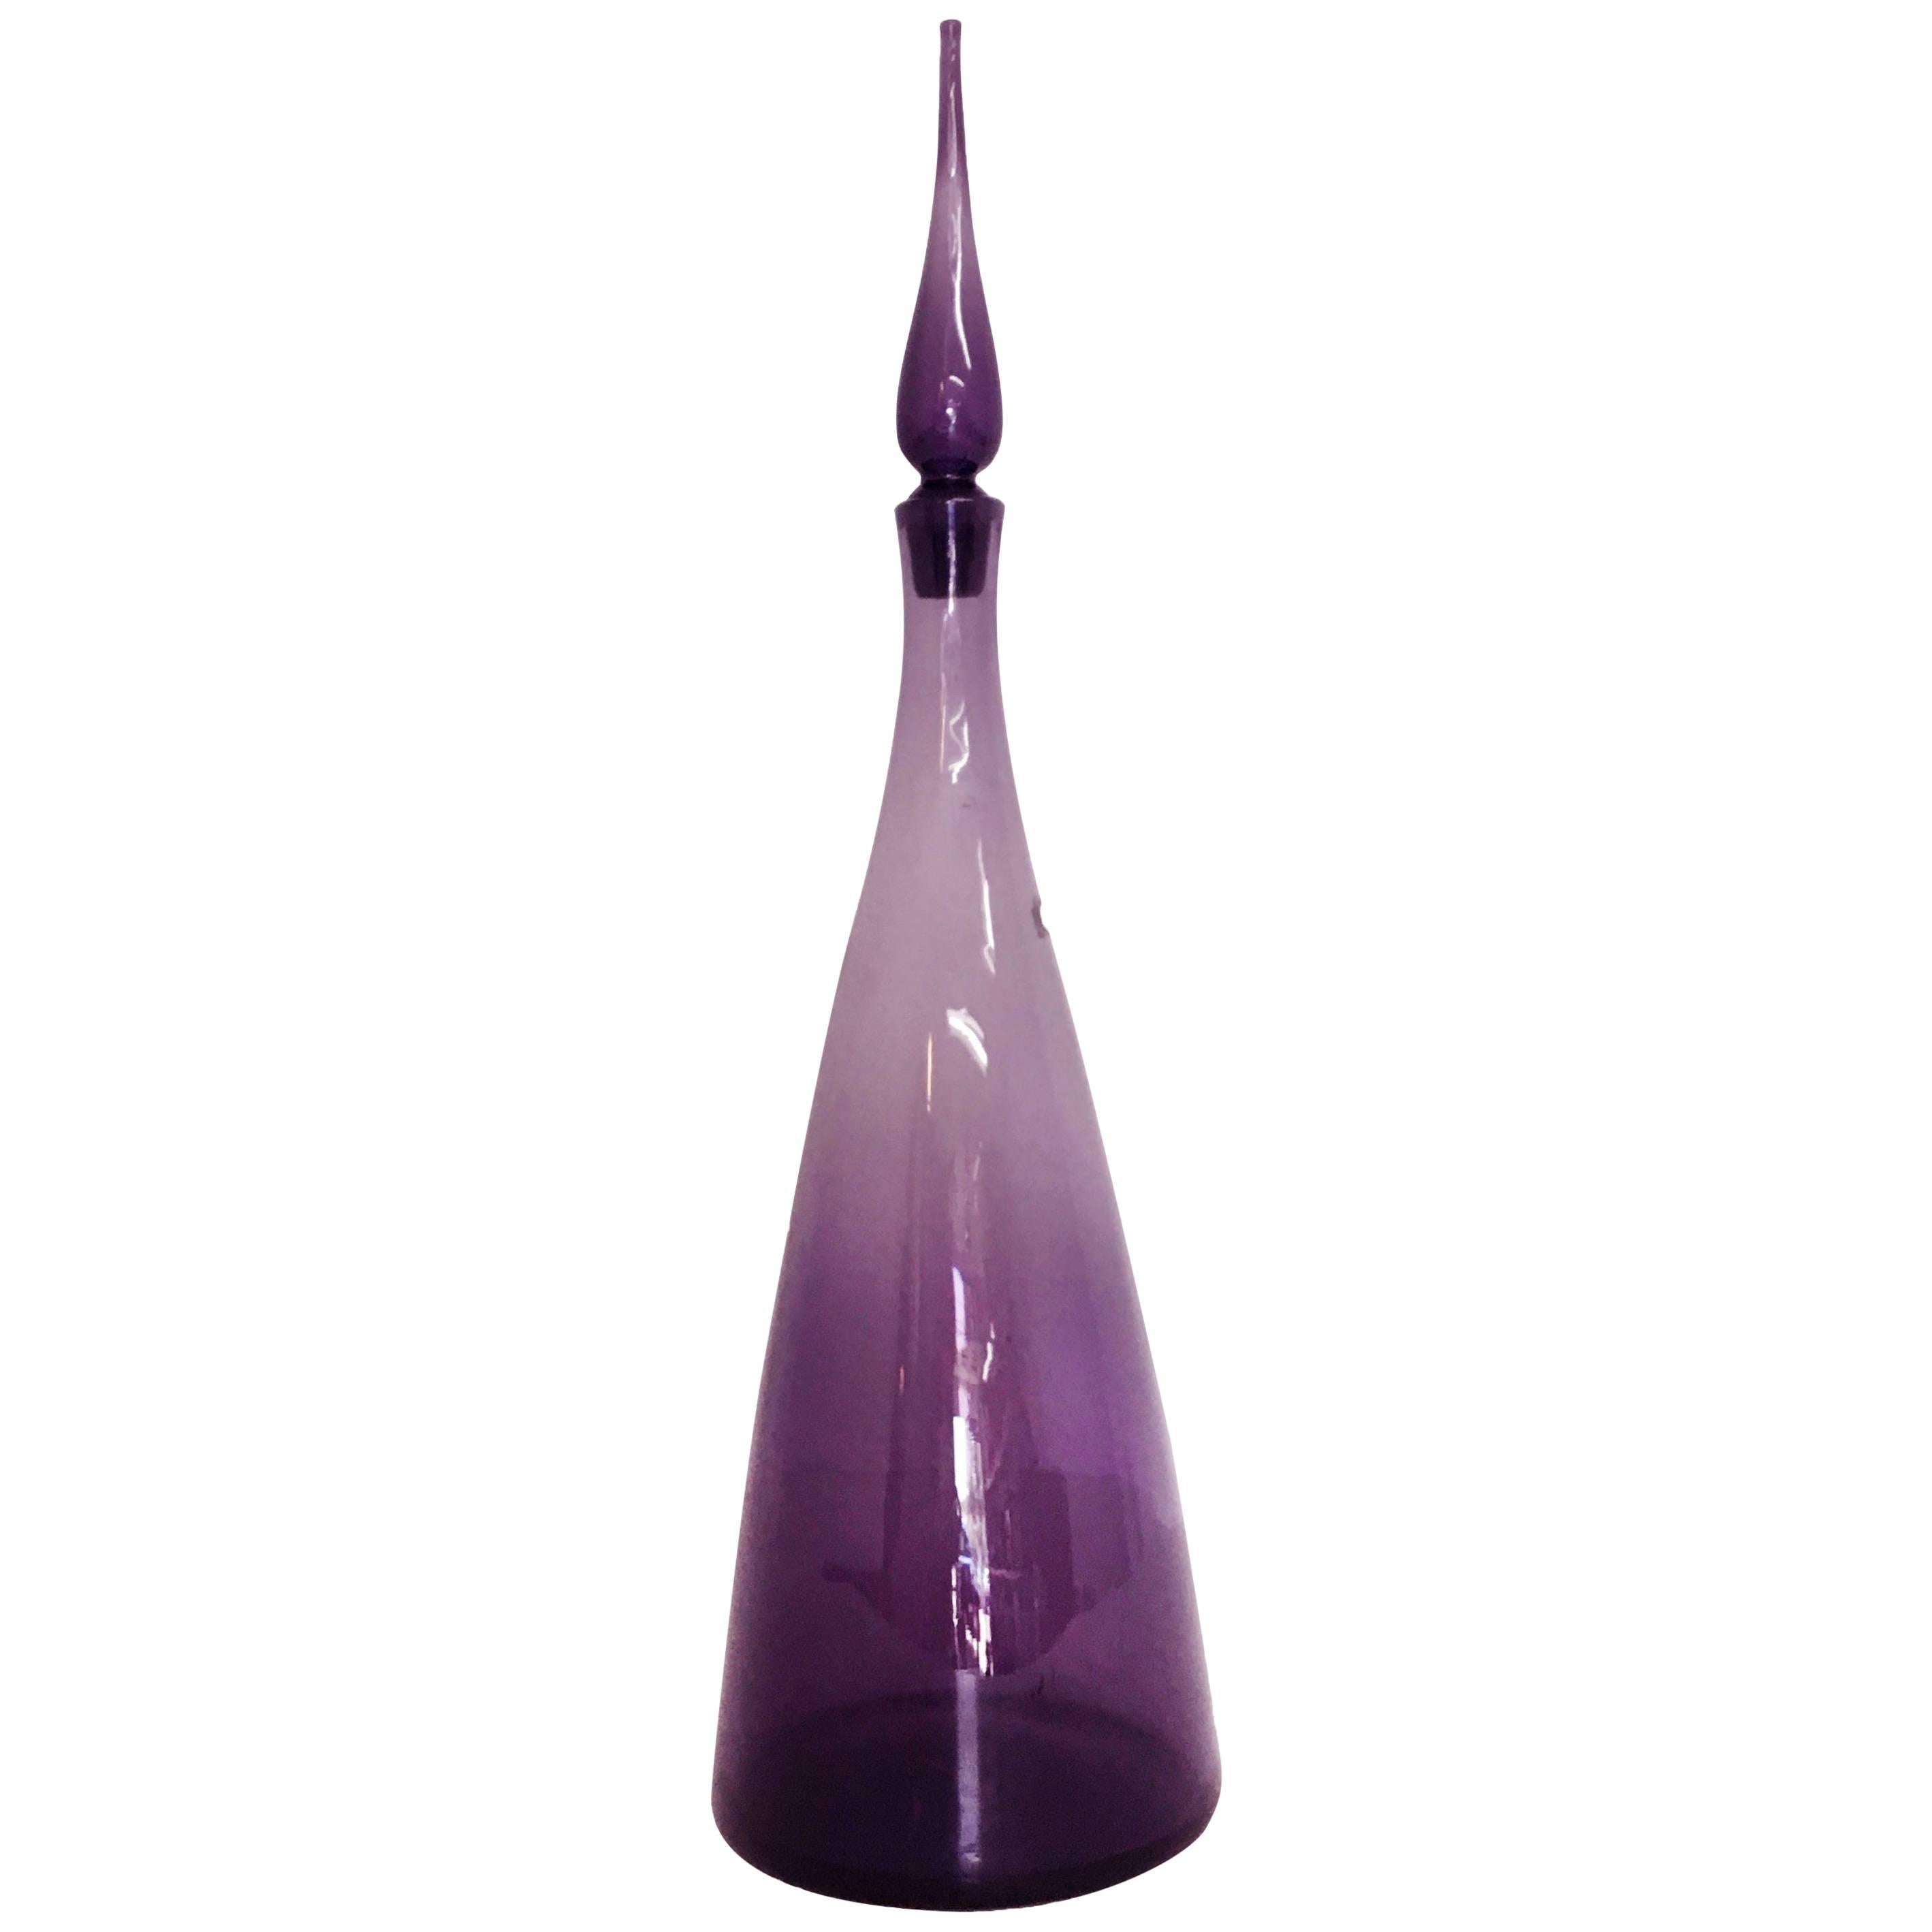 Midcentury Blenko Art Glass Decanter with Stopper in Deep Purple For Sale